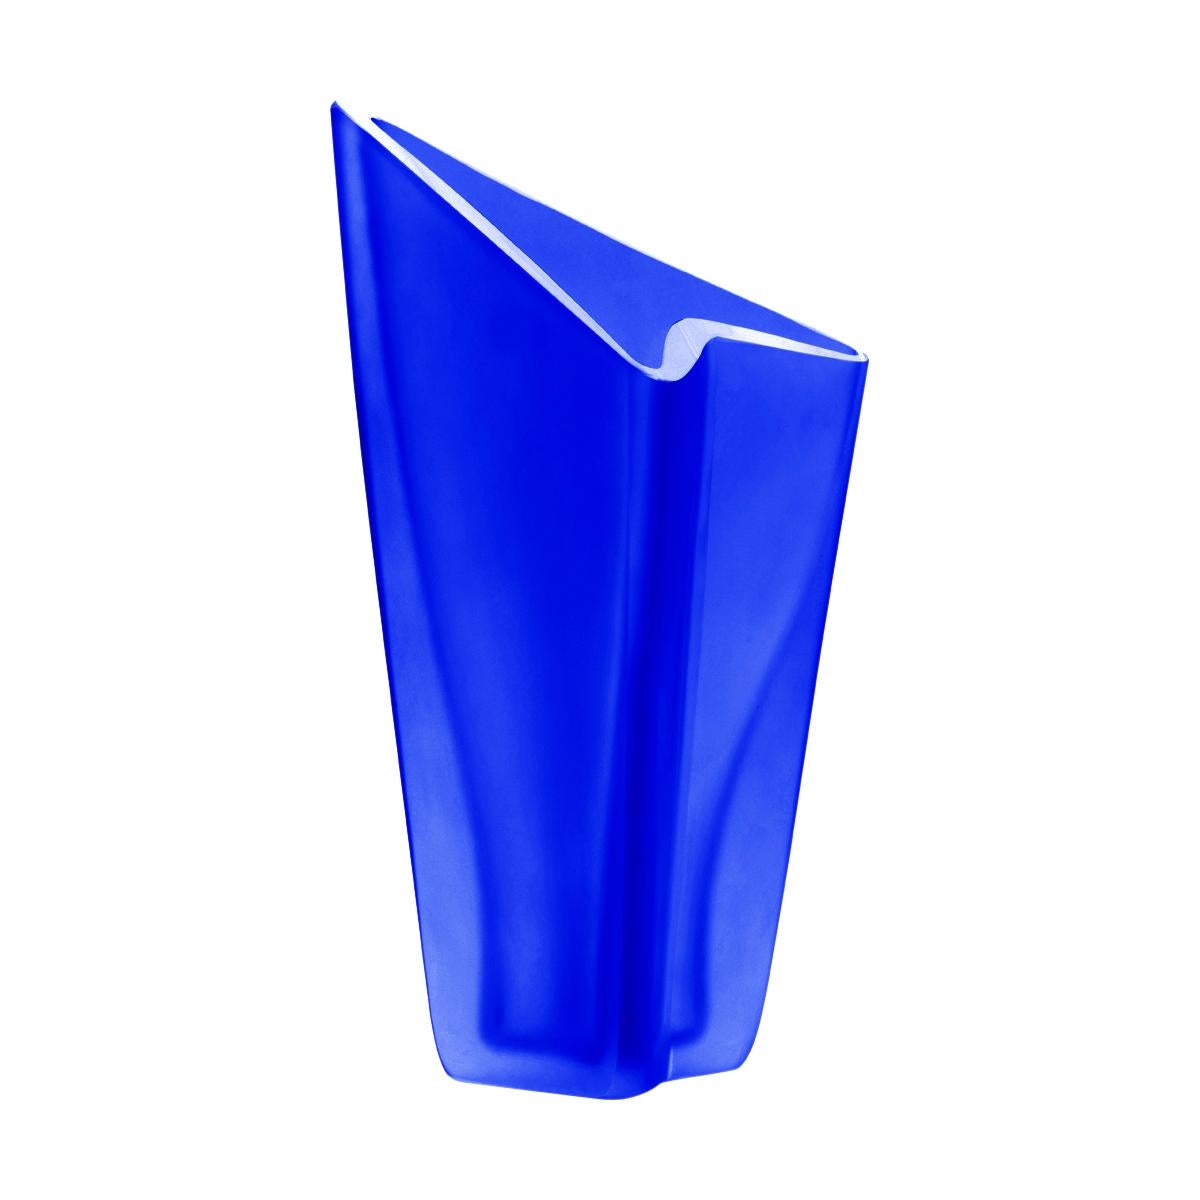 Freccia Large Blue Vase by Purho
Dimensions: D25 x W21 x H36 cm
Materials: Glass
Other colours and dimensions are available.

Purho is a new protagonist of made in Italy design , a work of synthesis, a research that has lasted for years, an